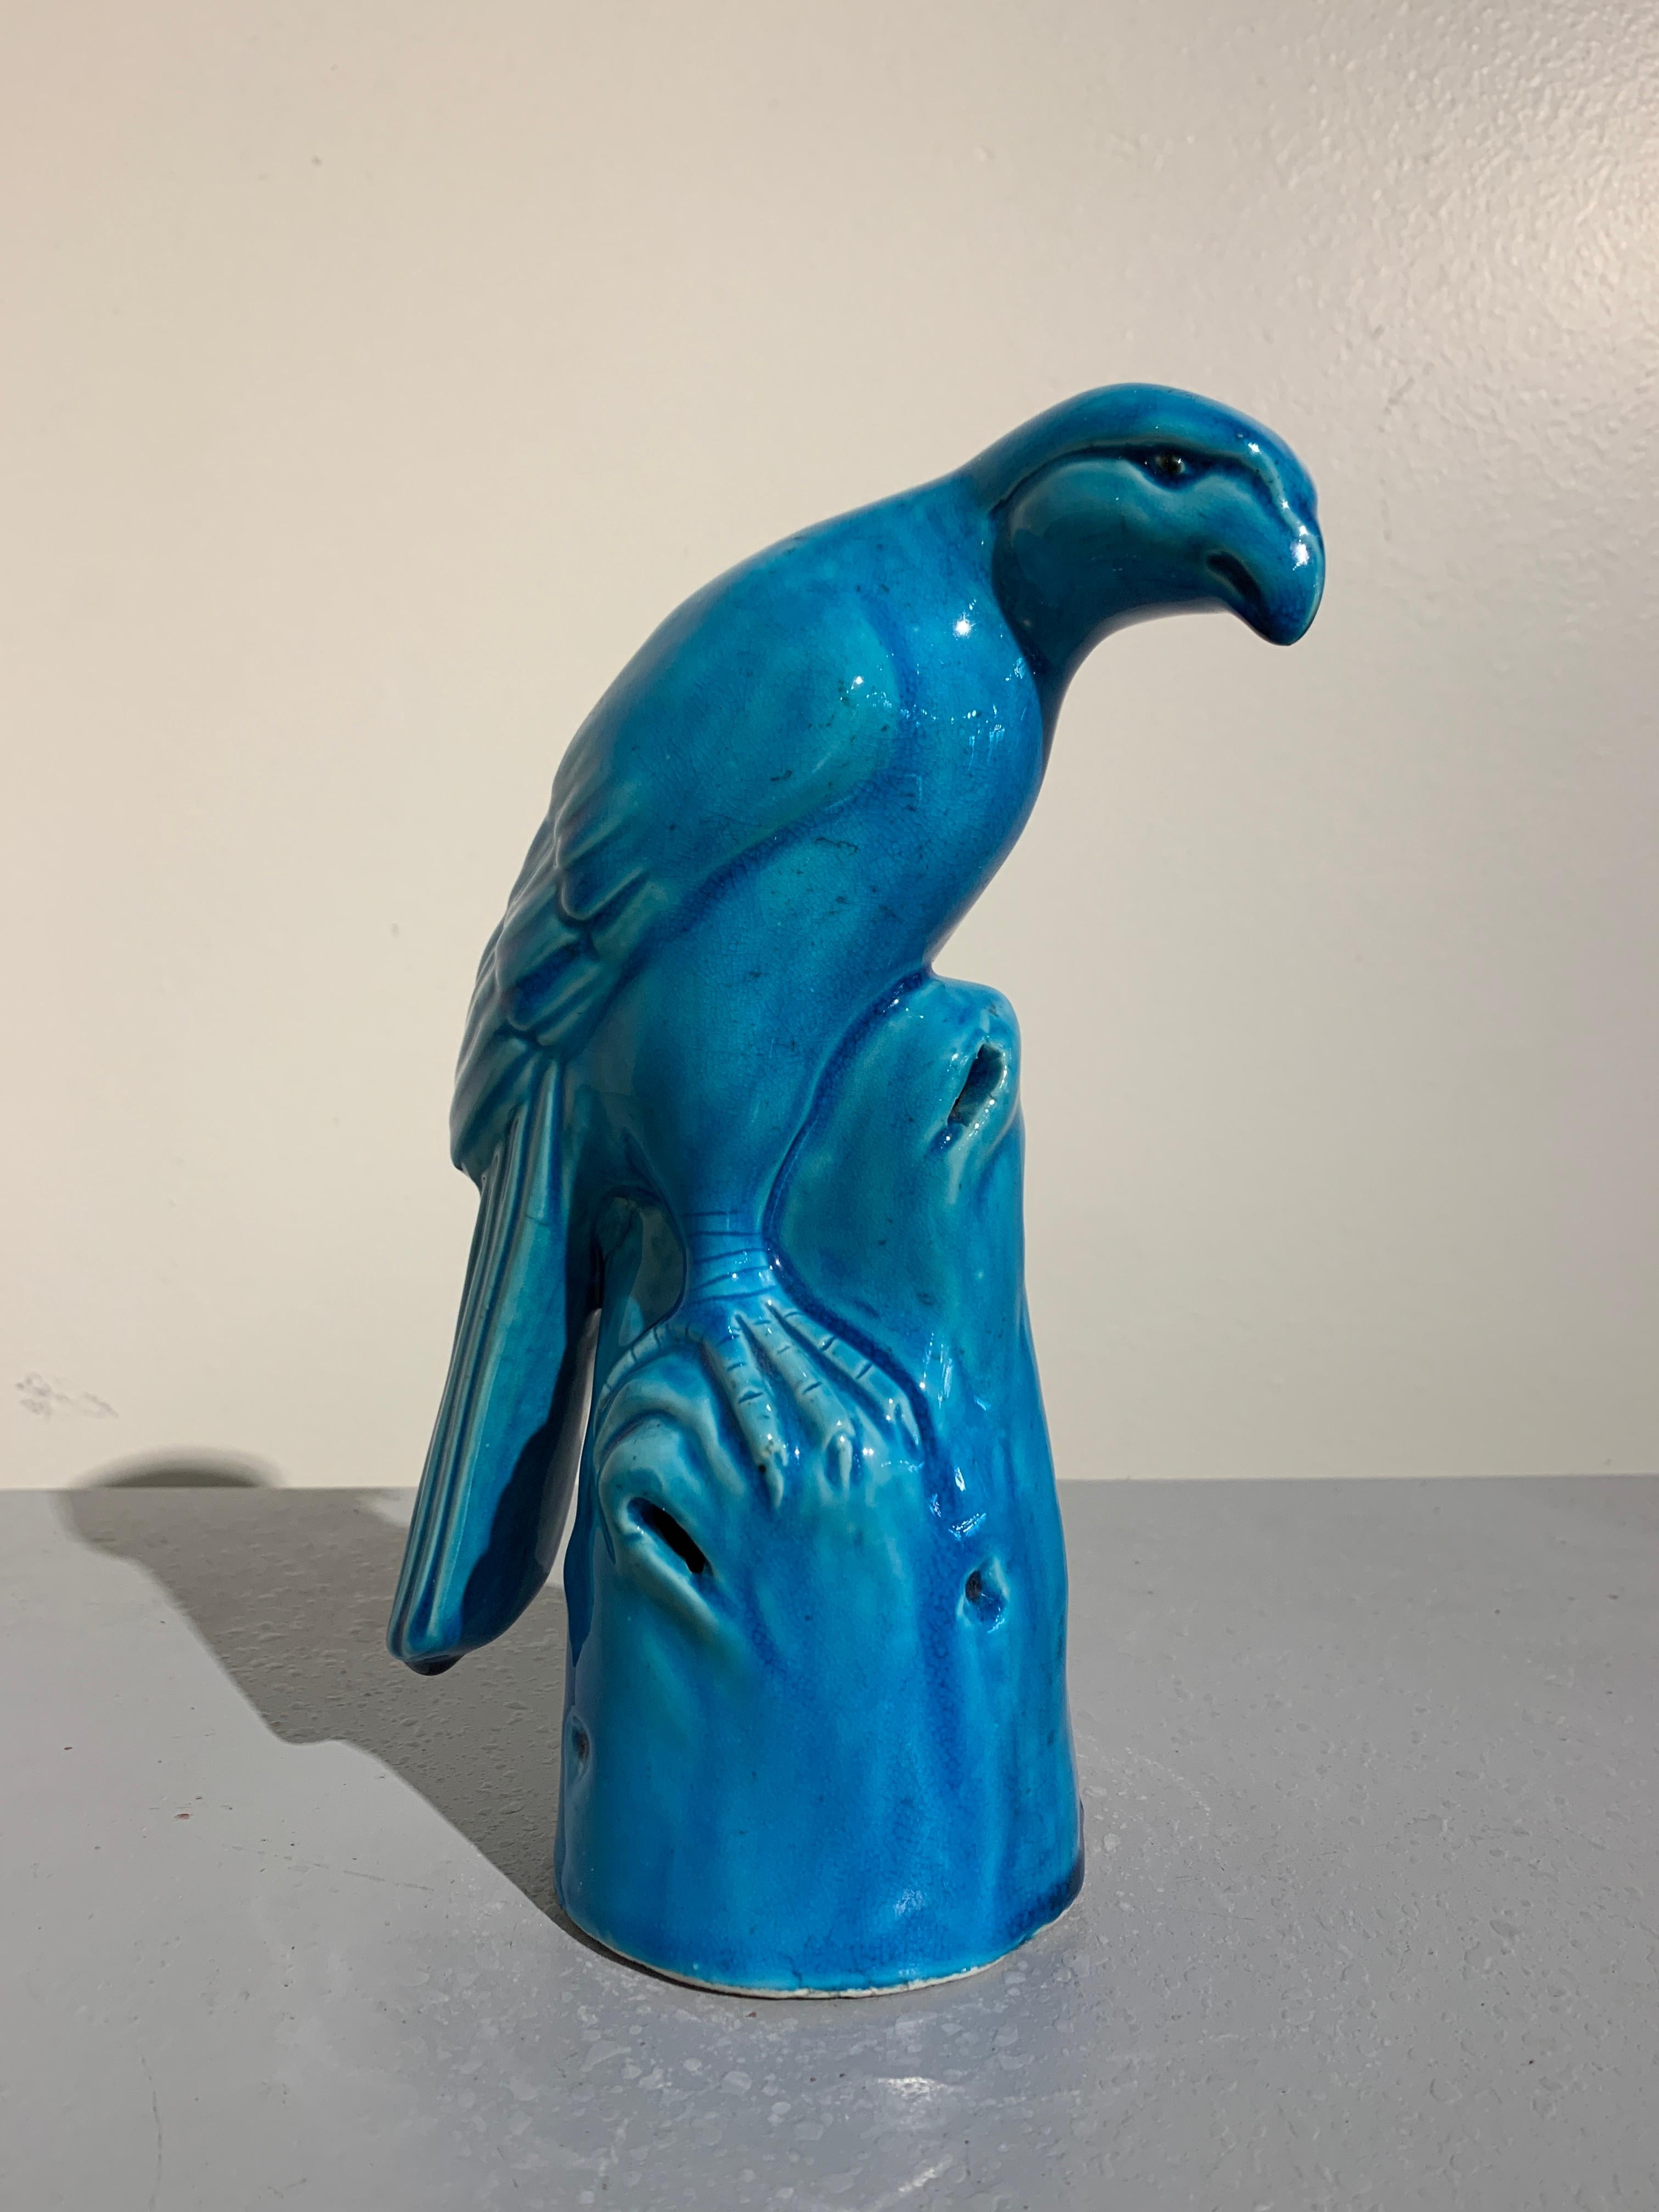 A charming vintage Chinese export turquoise glazed porcelain model of a hawk, mid-20th century, China.

The long tailed hawk portrayed perched on a rocky outcrop, somewhat hunched over, head down, gazing intently at some unseen object. The hawk's